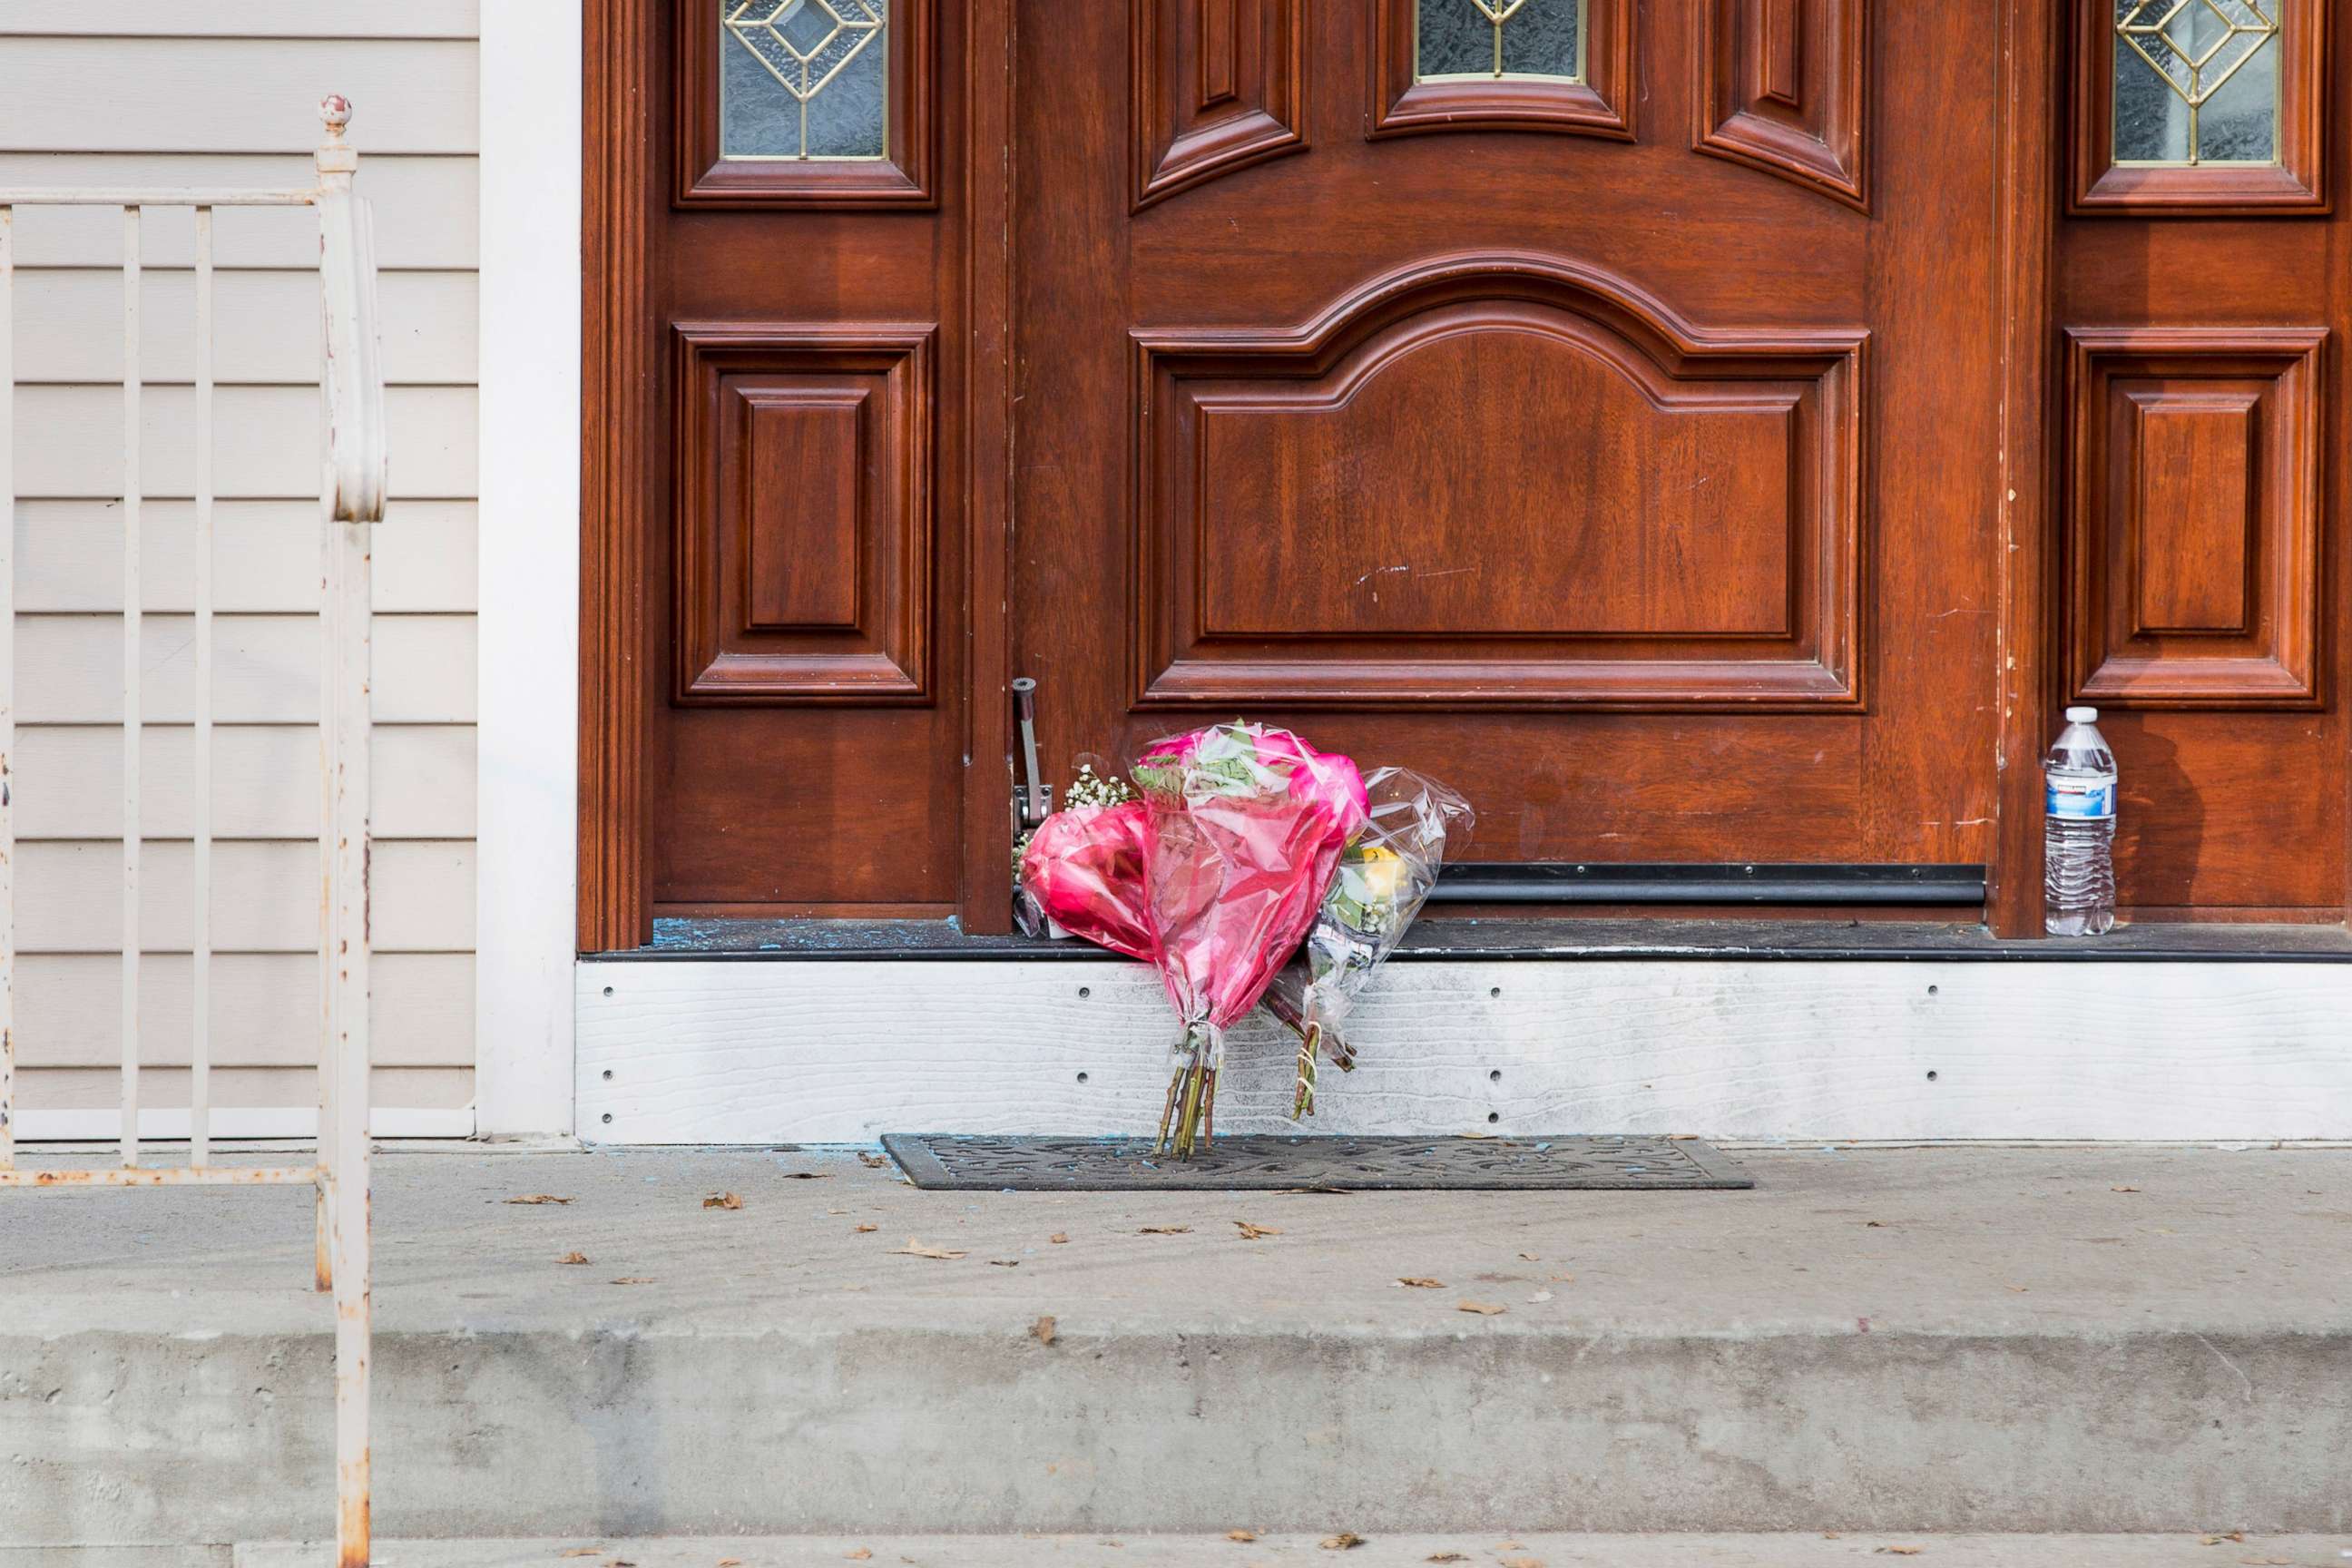 PHOTO: Flower bouquets rest on the doorstep of a rabbi's residence in Monsey, N.Y., Dec. 29, 2019, following a stabbing the previous night during a Hannukah celebration.